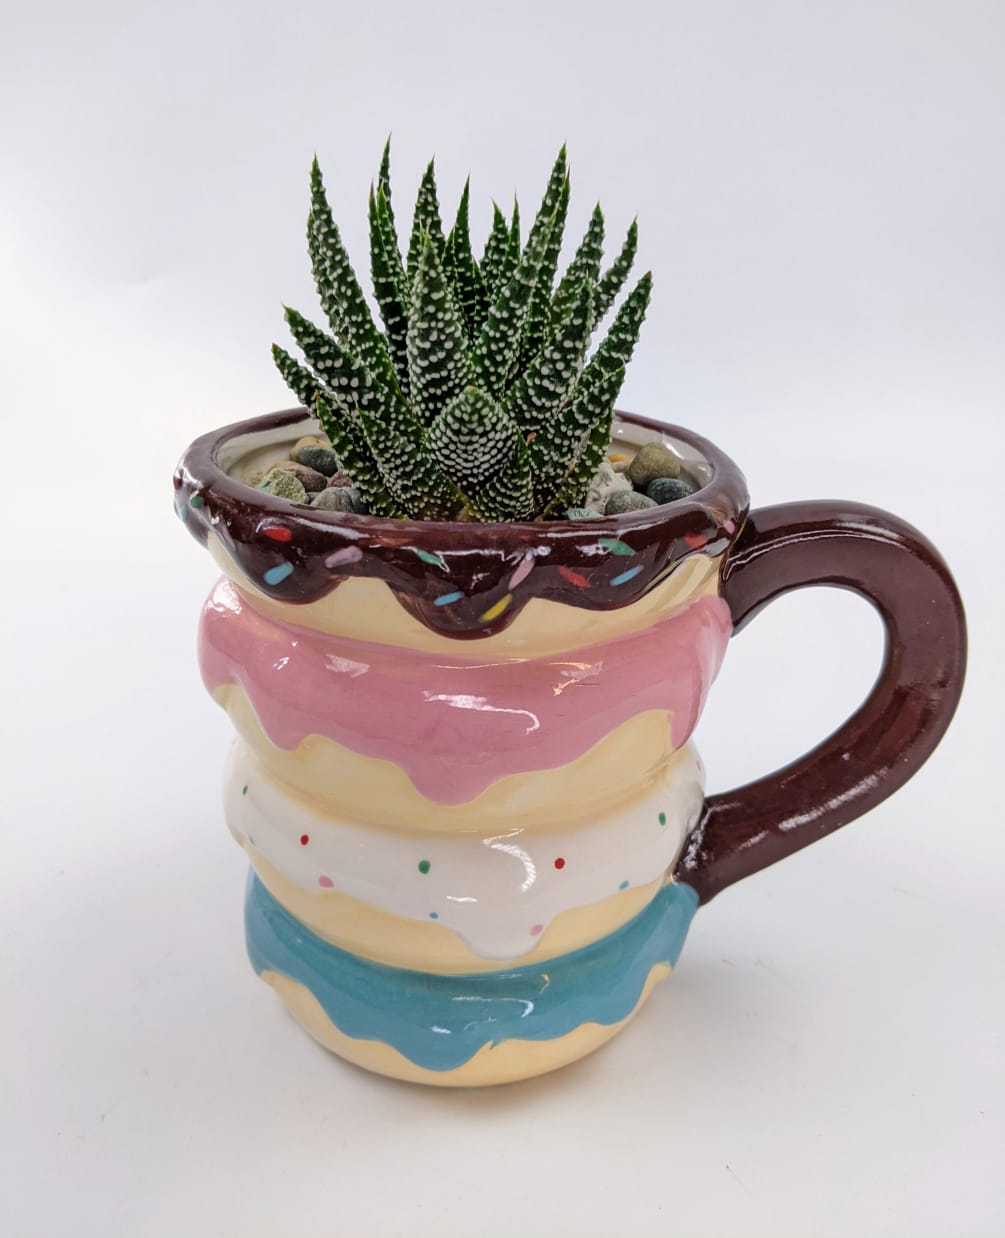 A living succulent selected and grown to complement a mug about 4